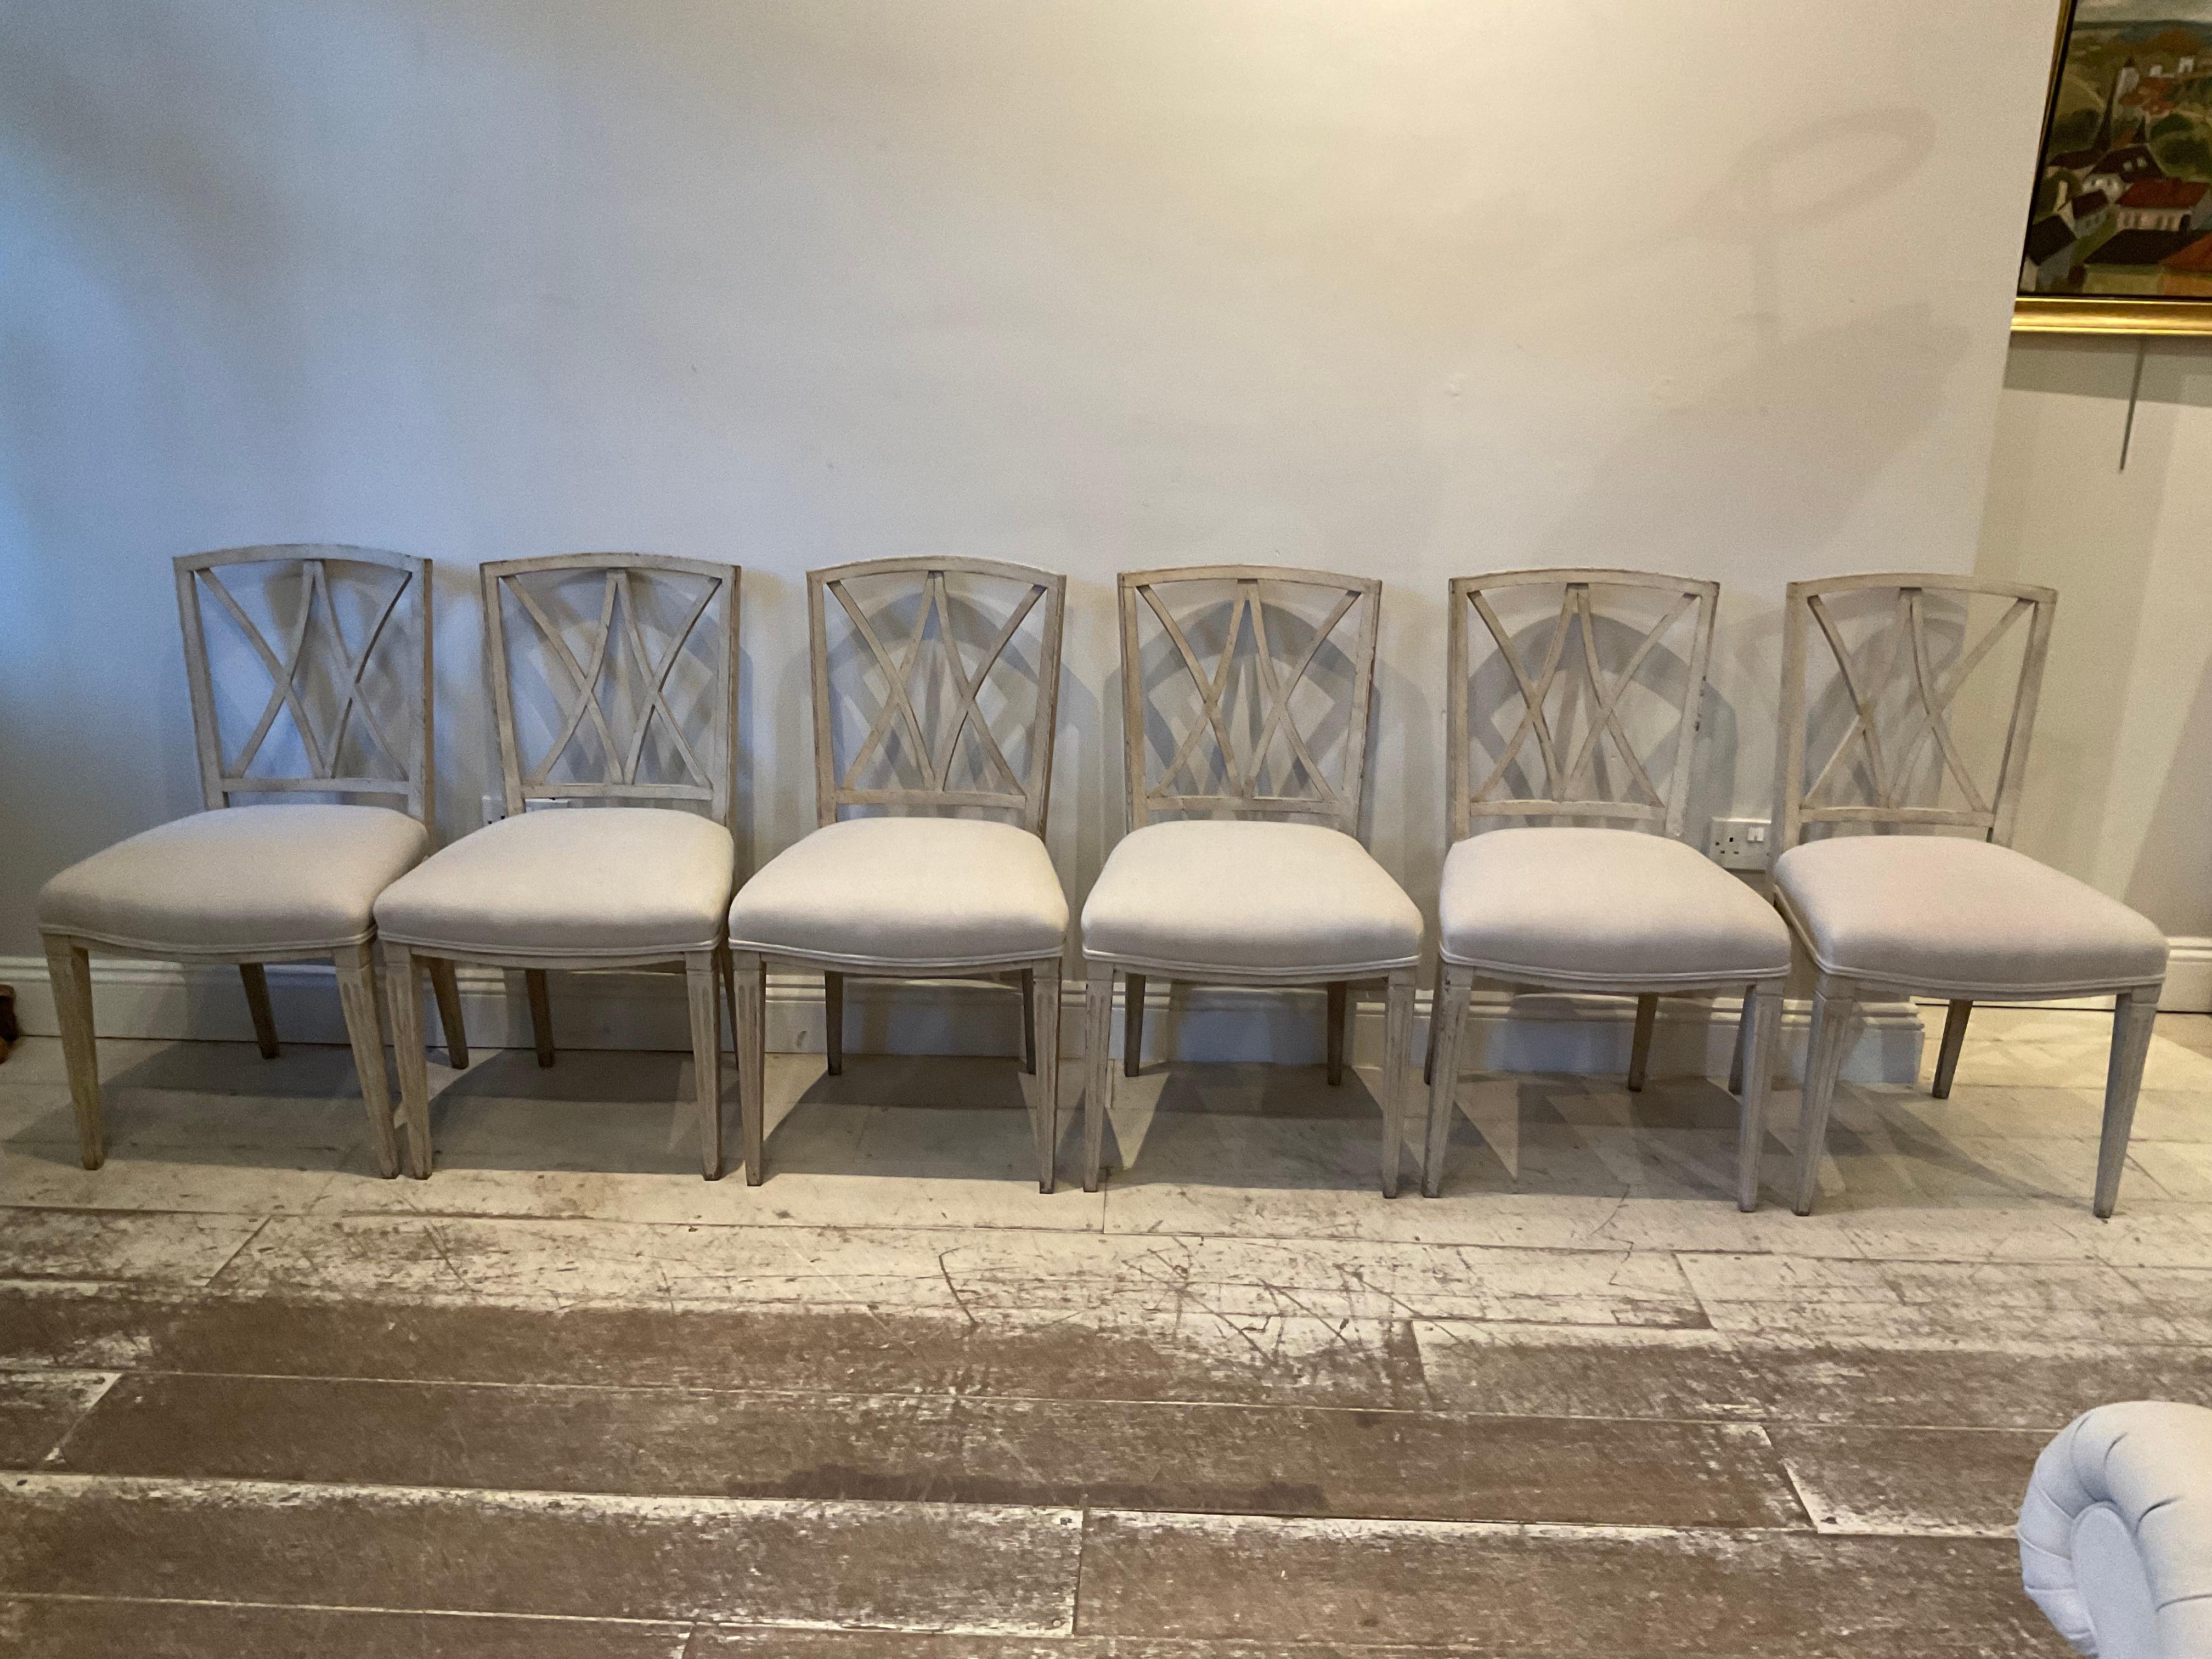 1940s painted dining chairs.
A lovely useful set of Italian dining chairs which have been painted later featuring highly decorative lattice backs.
Upholstered in a neutral linen.
This chairs would work well in many different styles of interior.